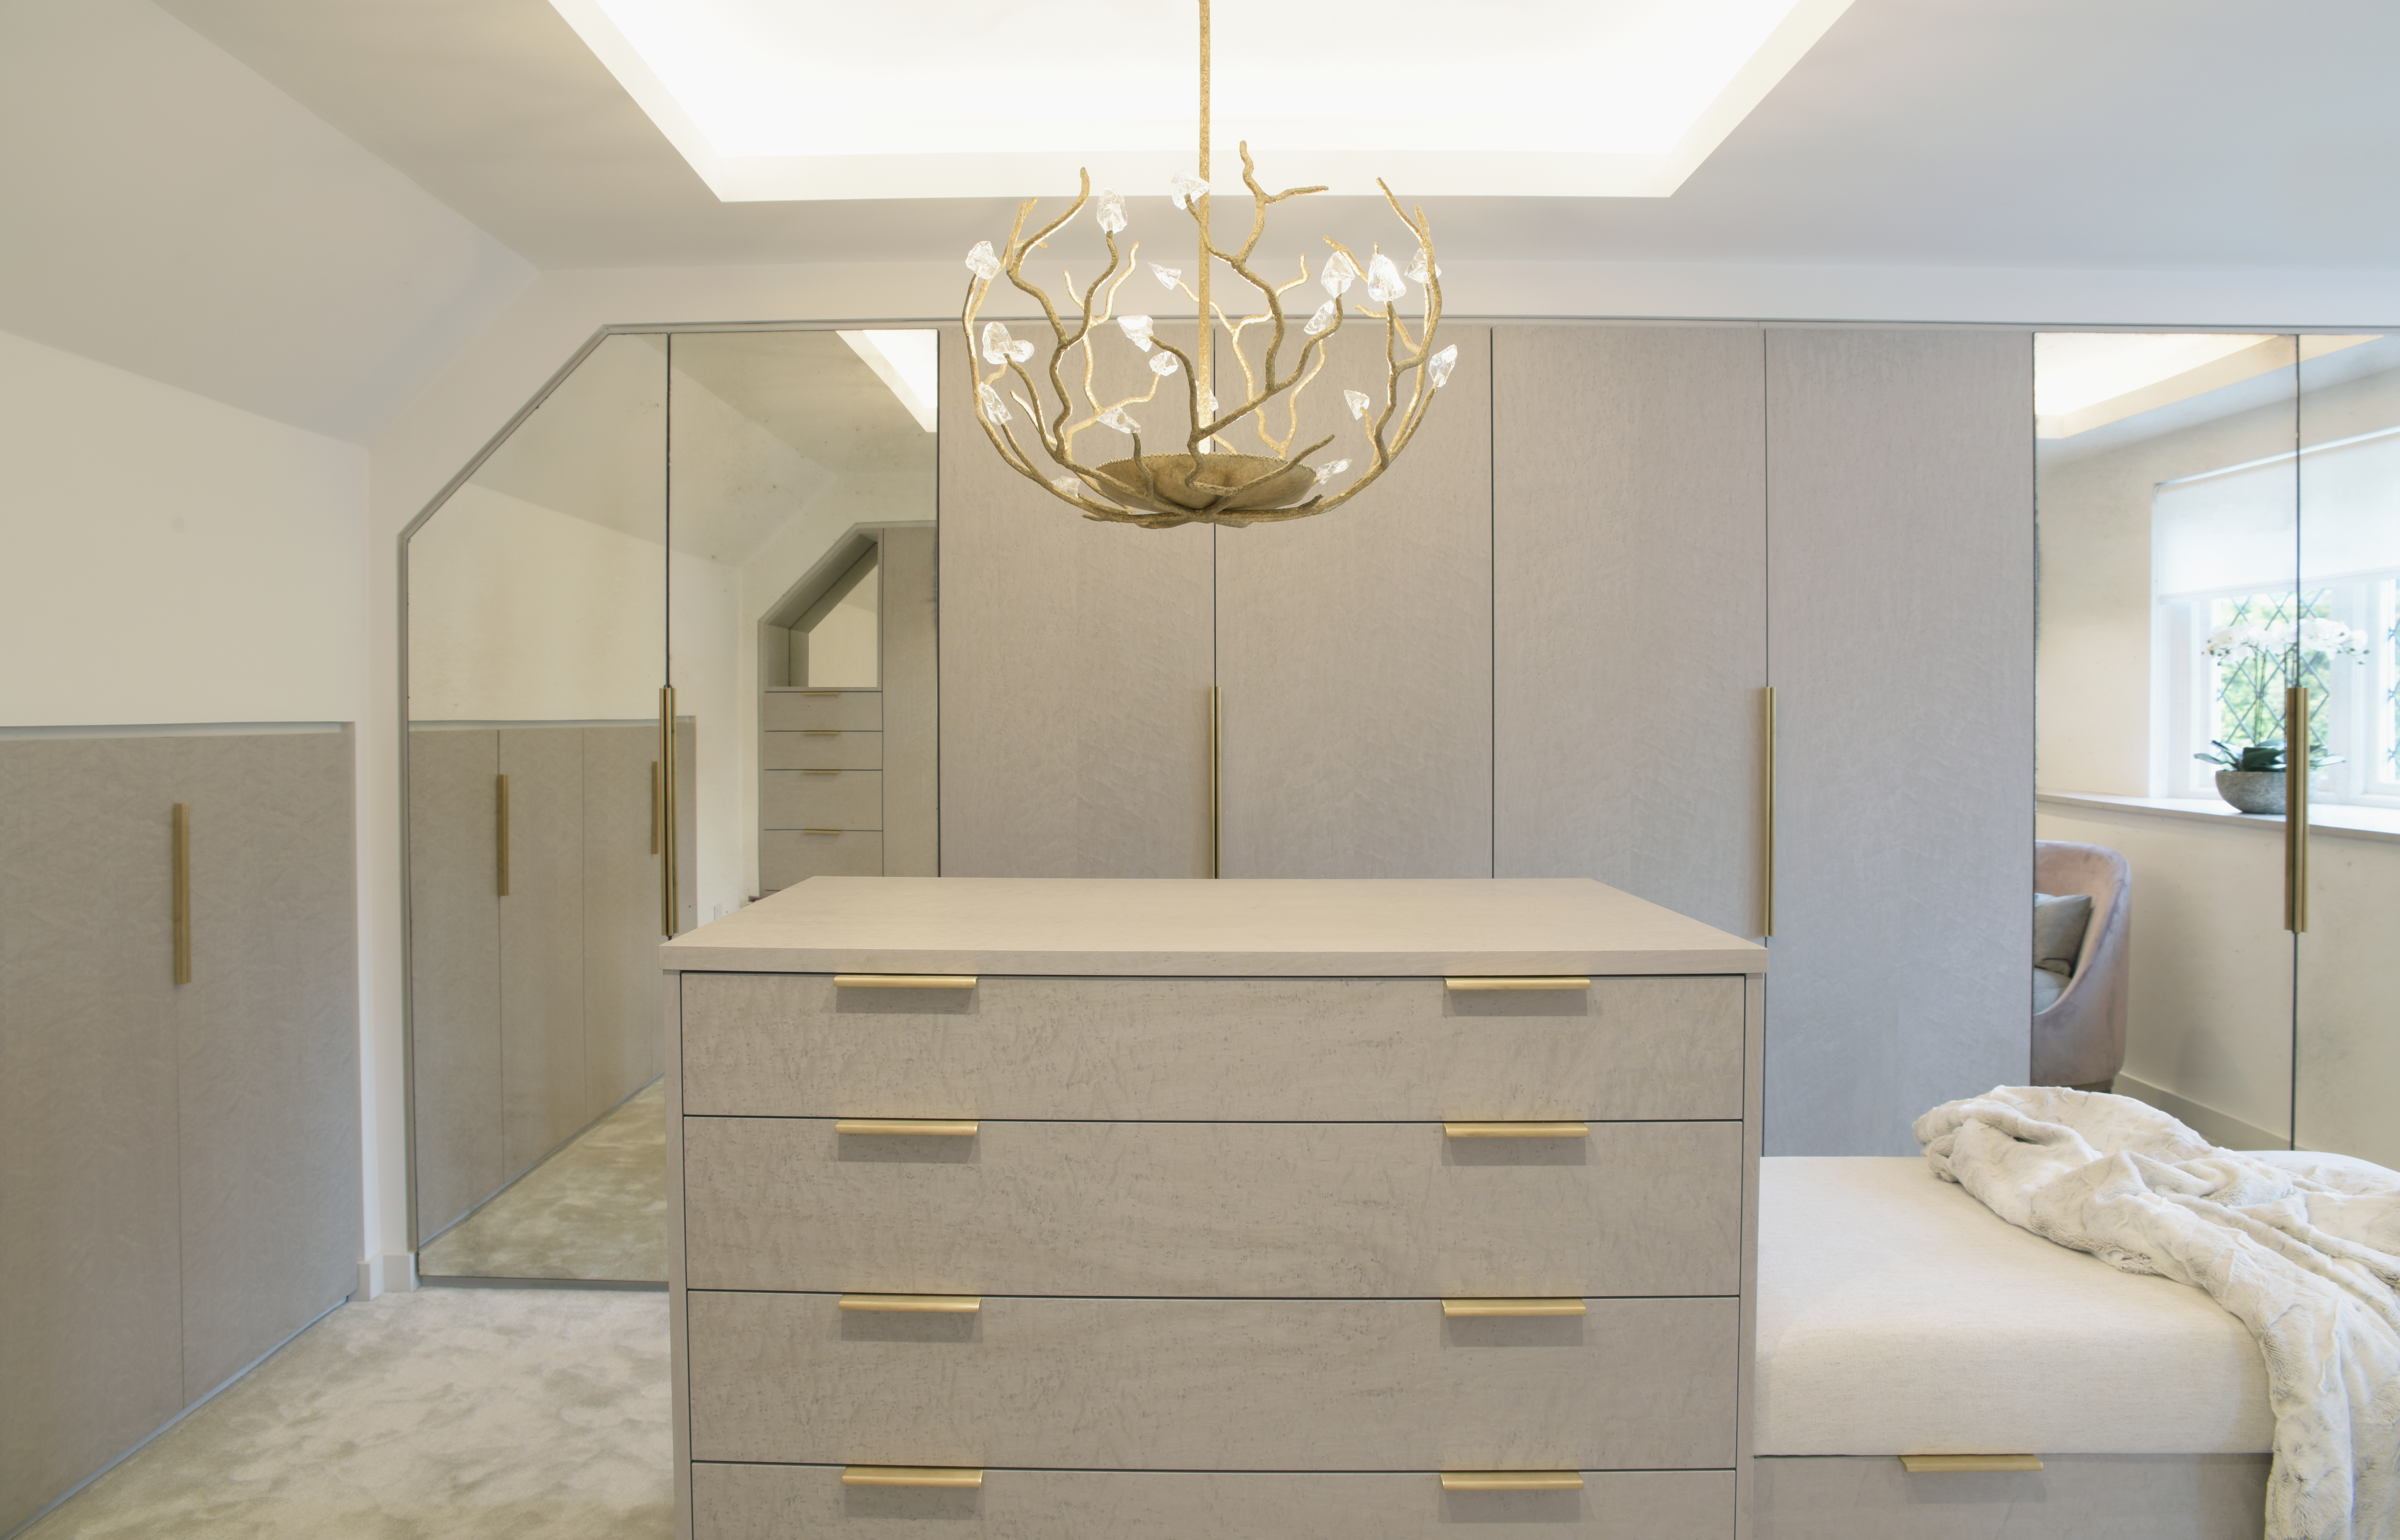 Elegant large dressing room with lit ceiling and central island with gold chandelier